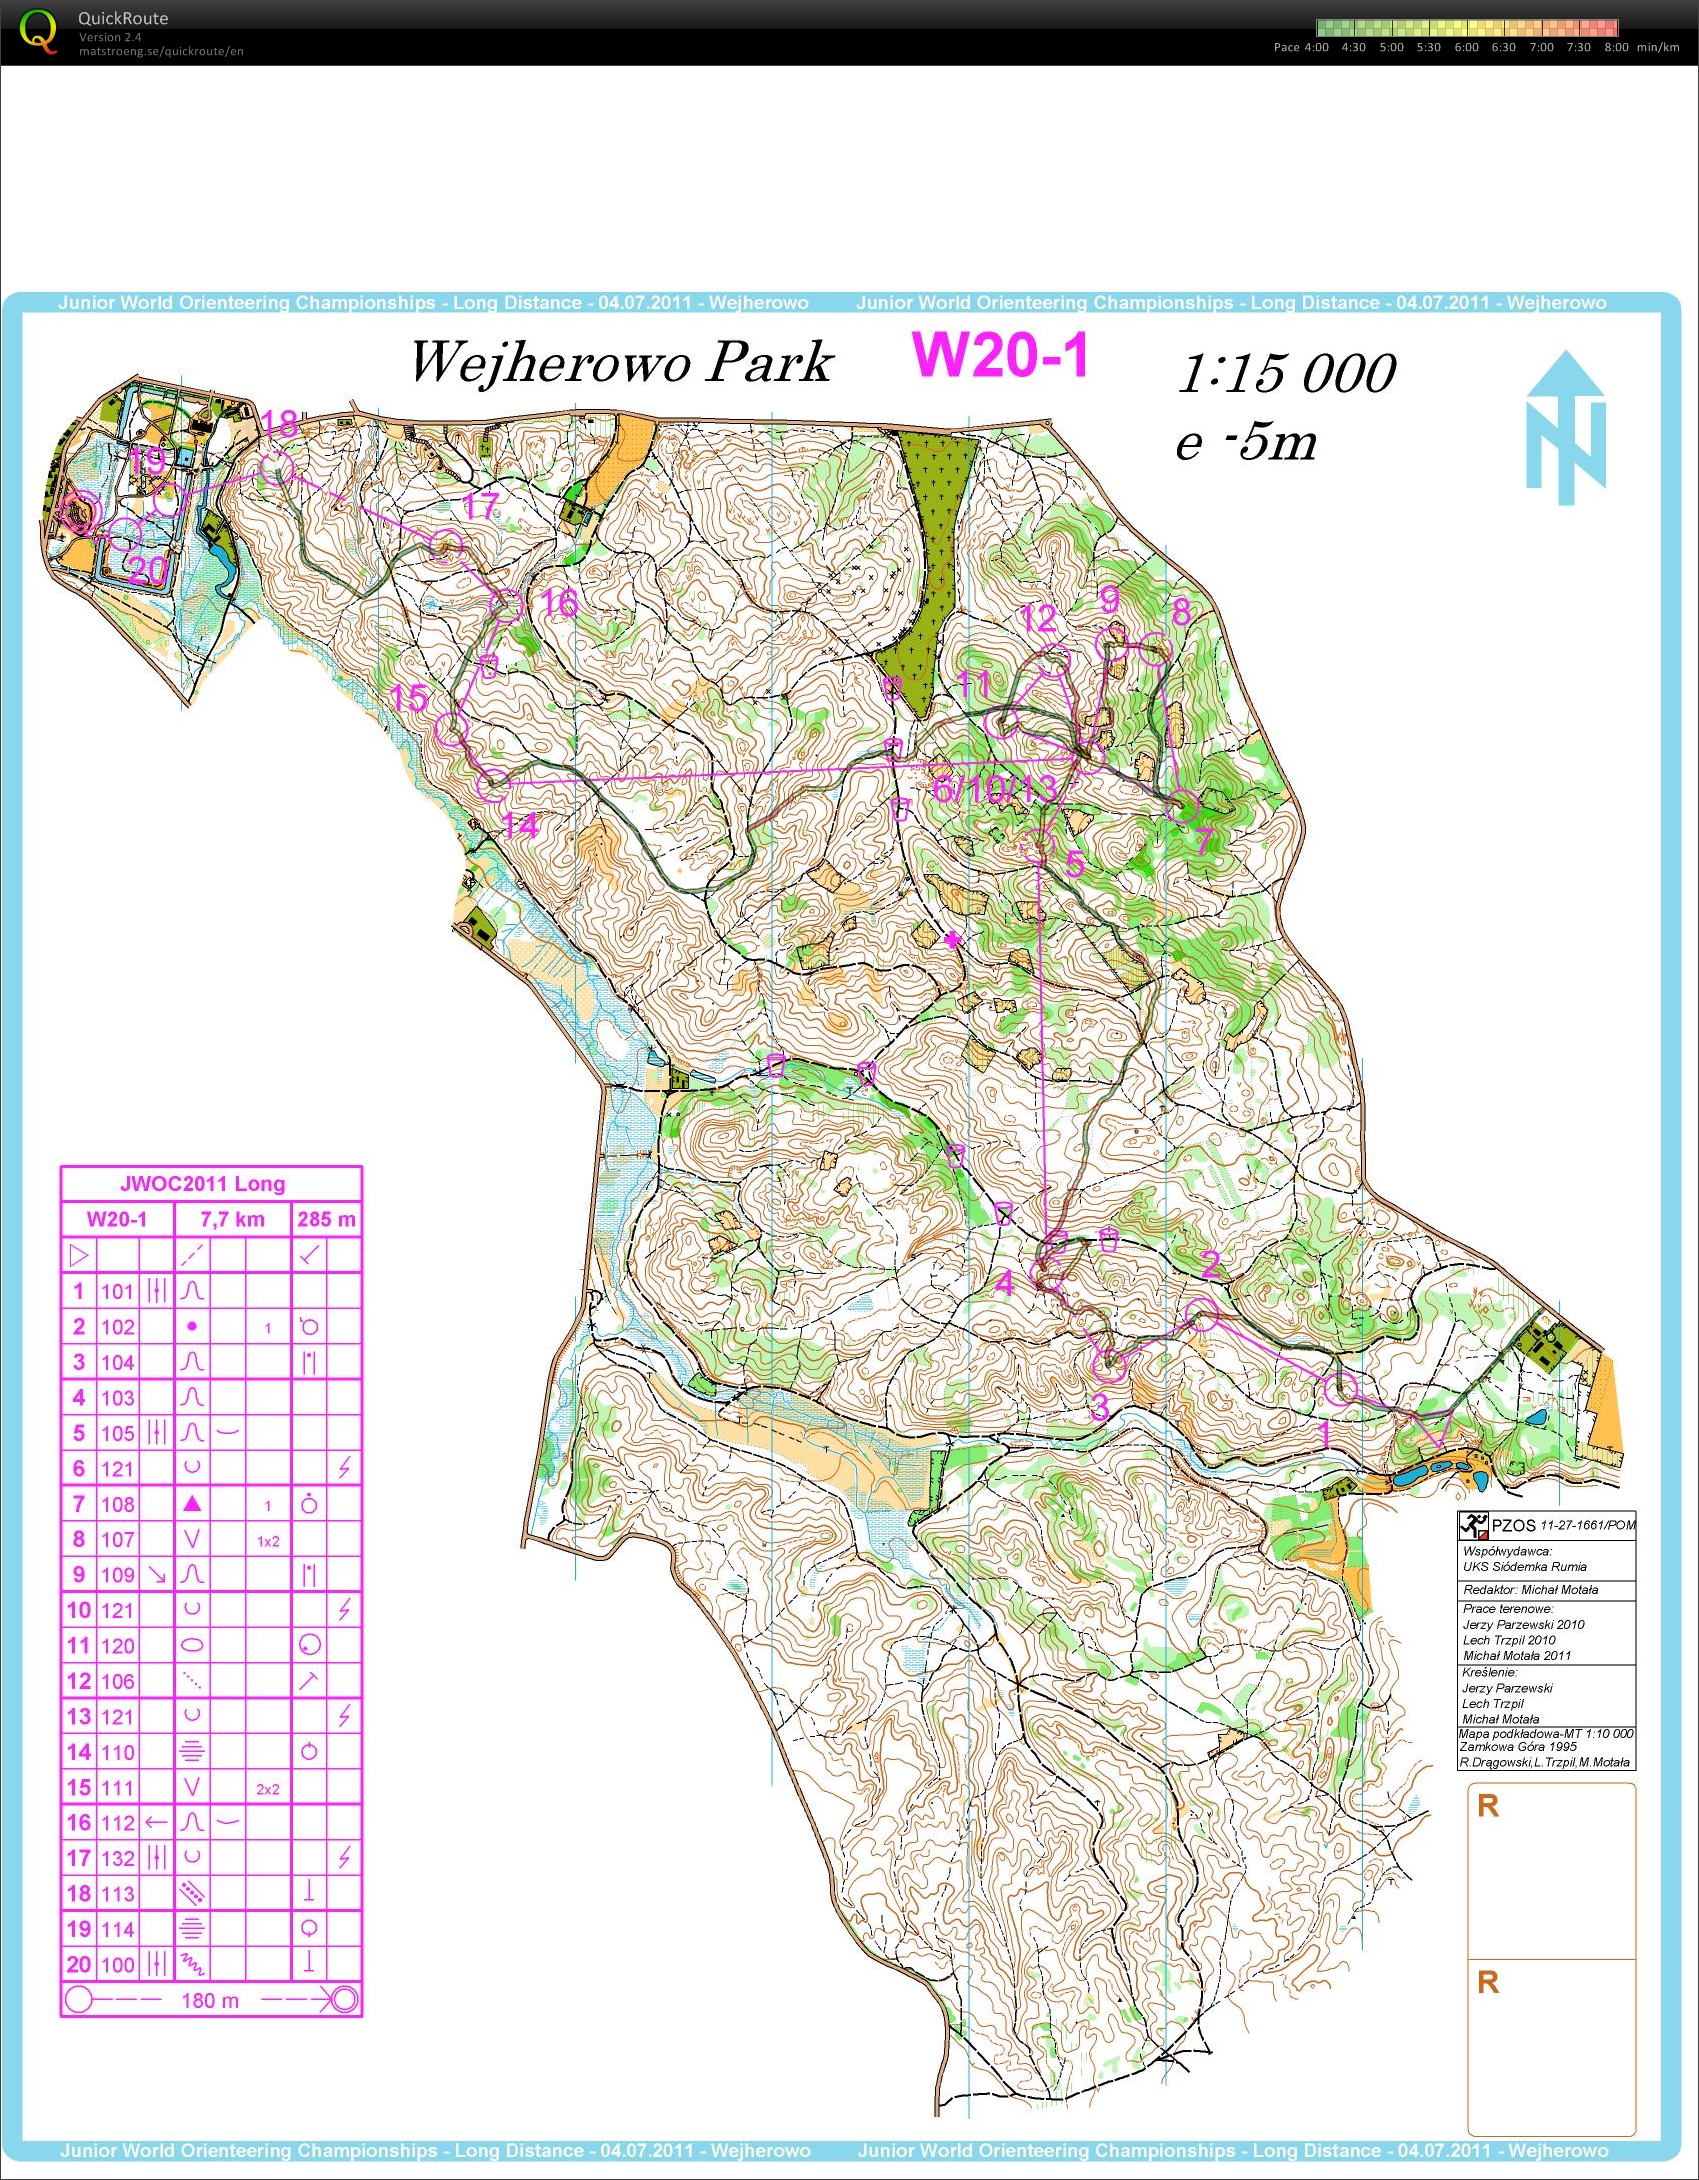 MP camp, long W20 from JWOC 2011 (13.09.2014)